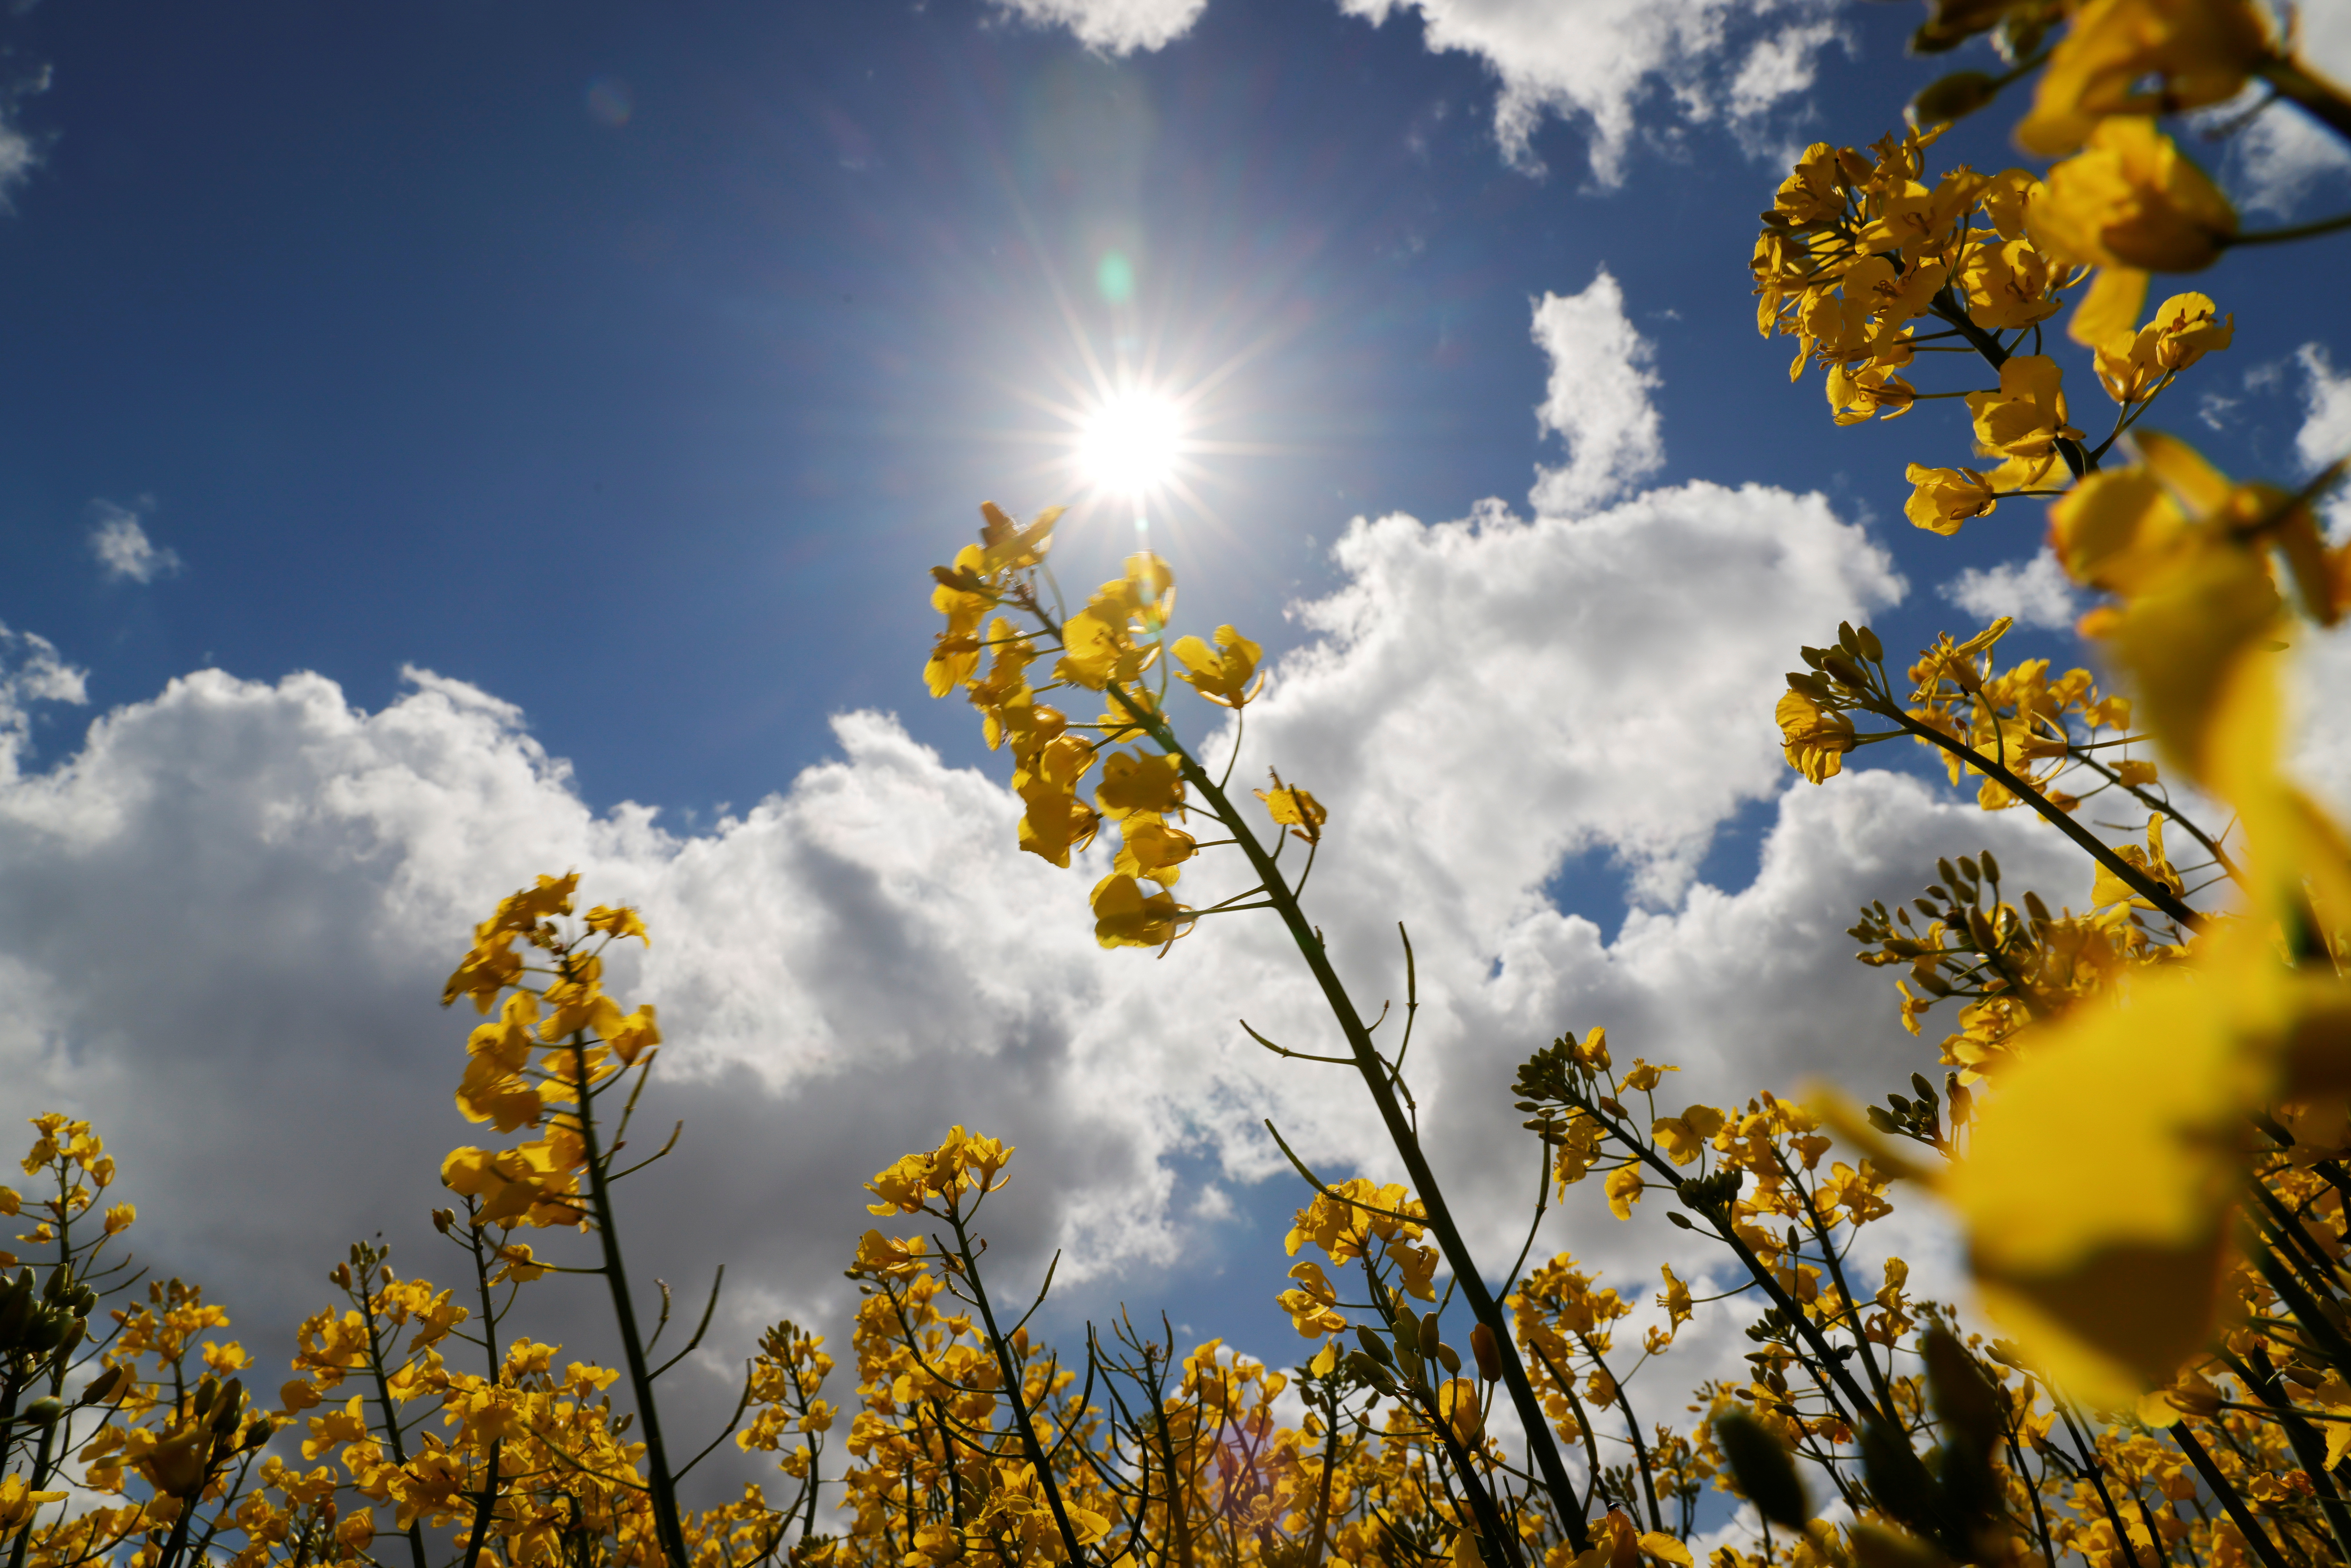 The sun shines over a yellow rapeseed field in Baralle